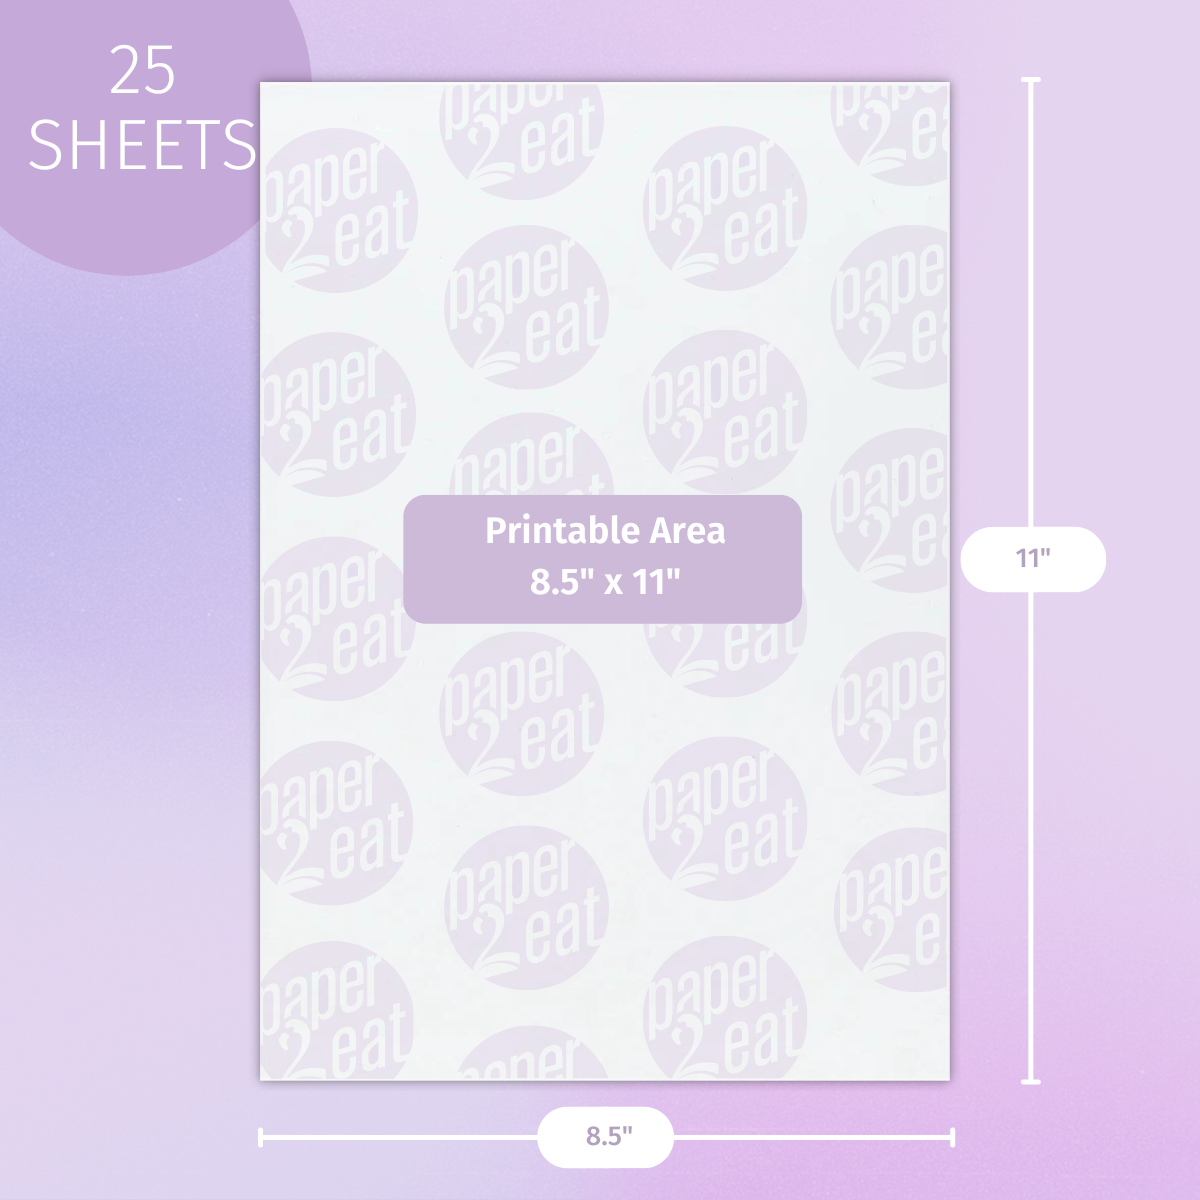 Miracle Transfer Sheets - 25 Count